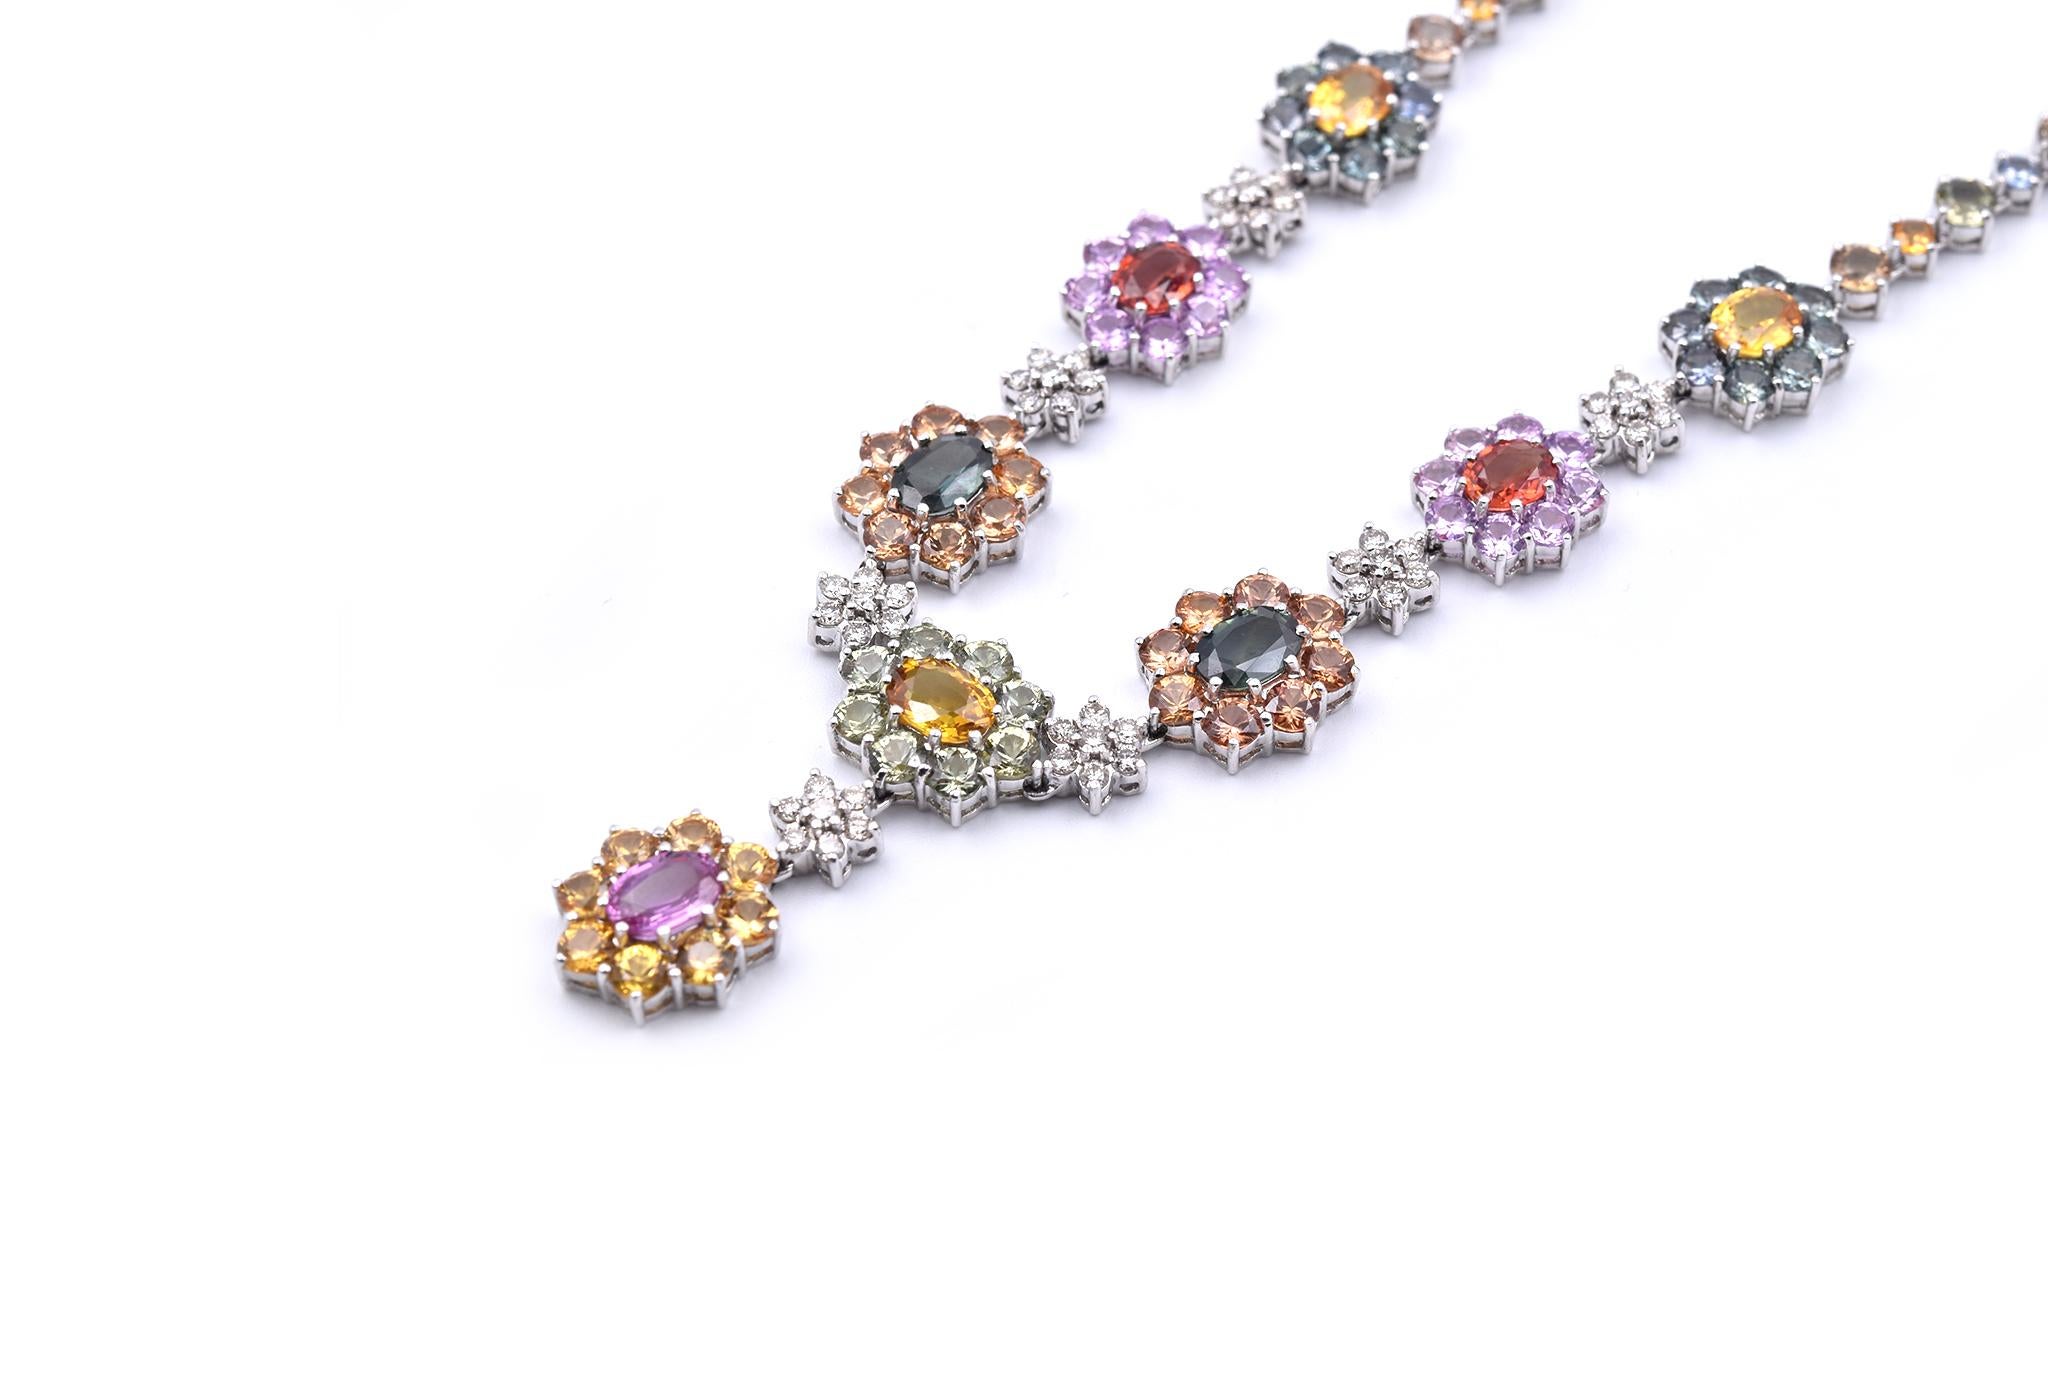 Designer: custom designed
Material: 18k white gold
Sapphires: round and oval cuts, turquoise, pink, red, orange, green, and yellow sapphires
Diamonds: 49 round brilliant cuts = 1.00cttw
Color: I-J
Clarity: VS2
Dimensions: necklace measures 15-inches